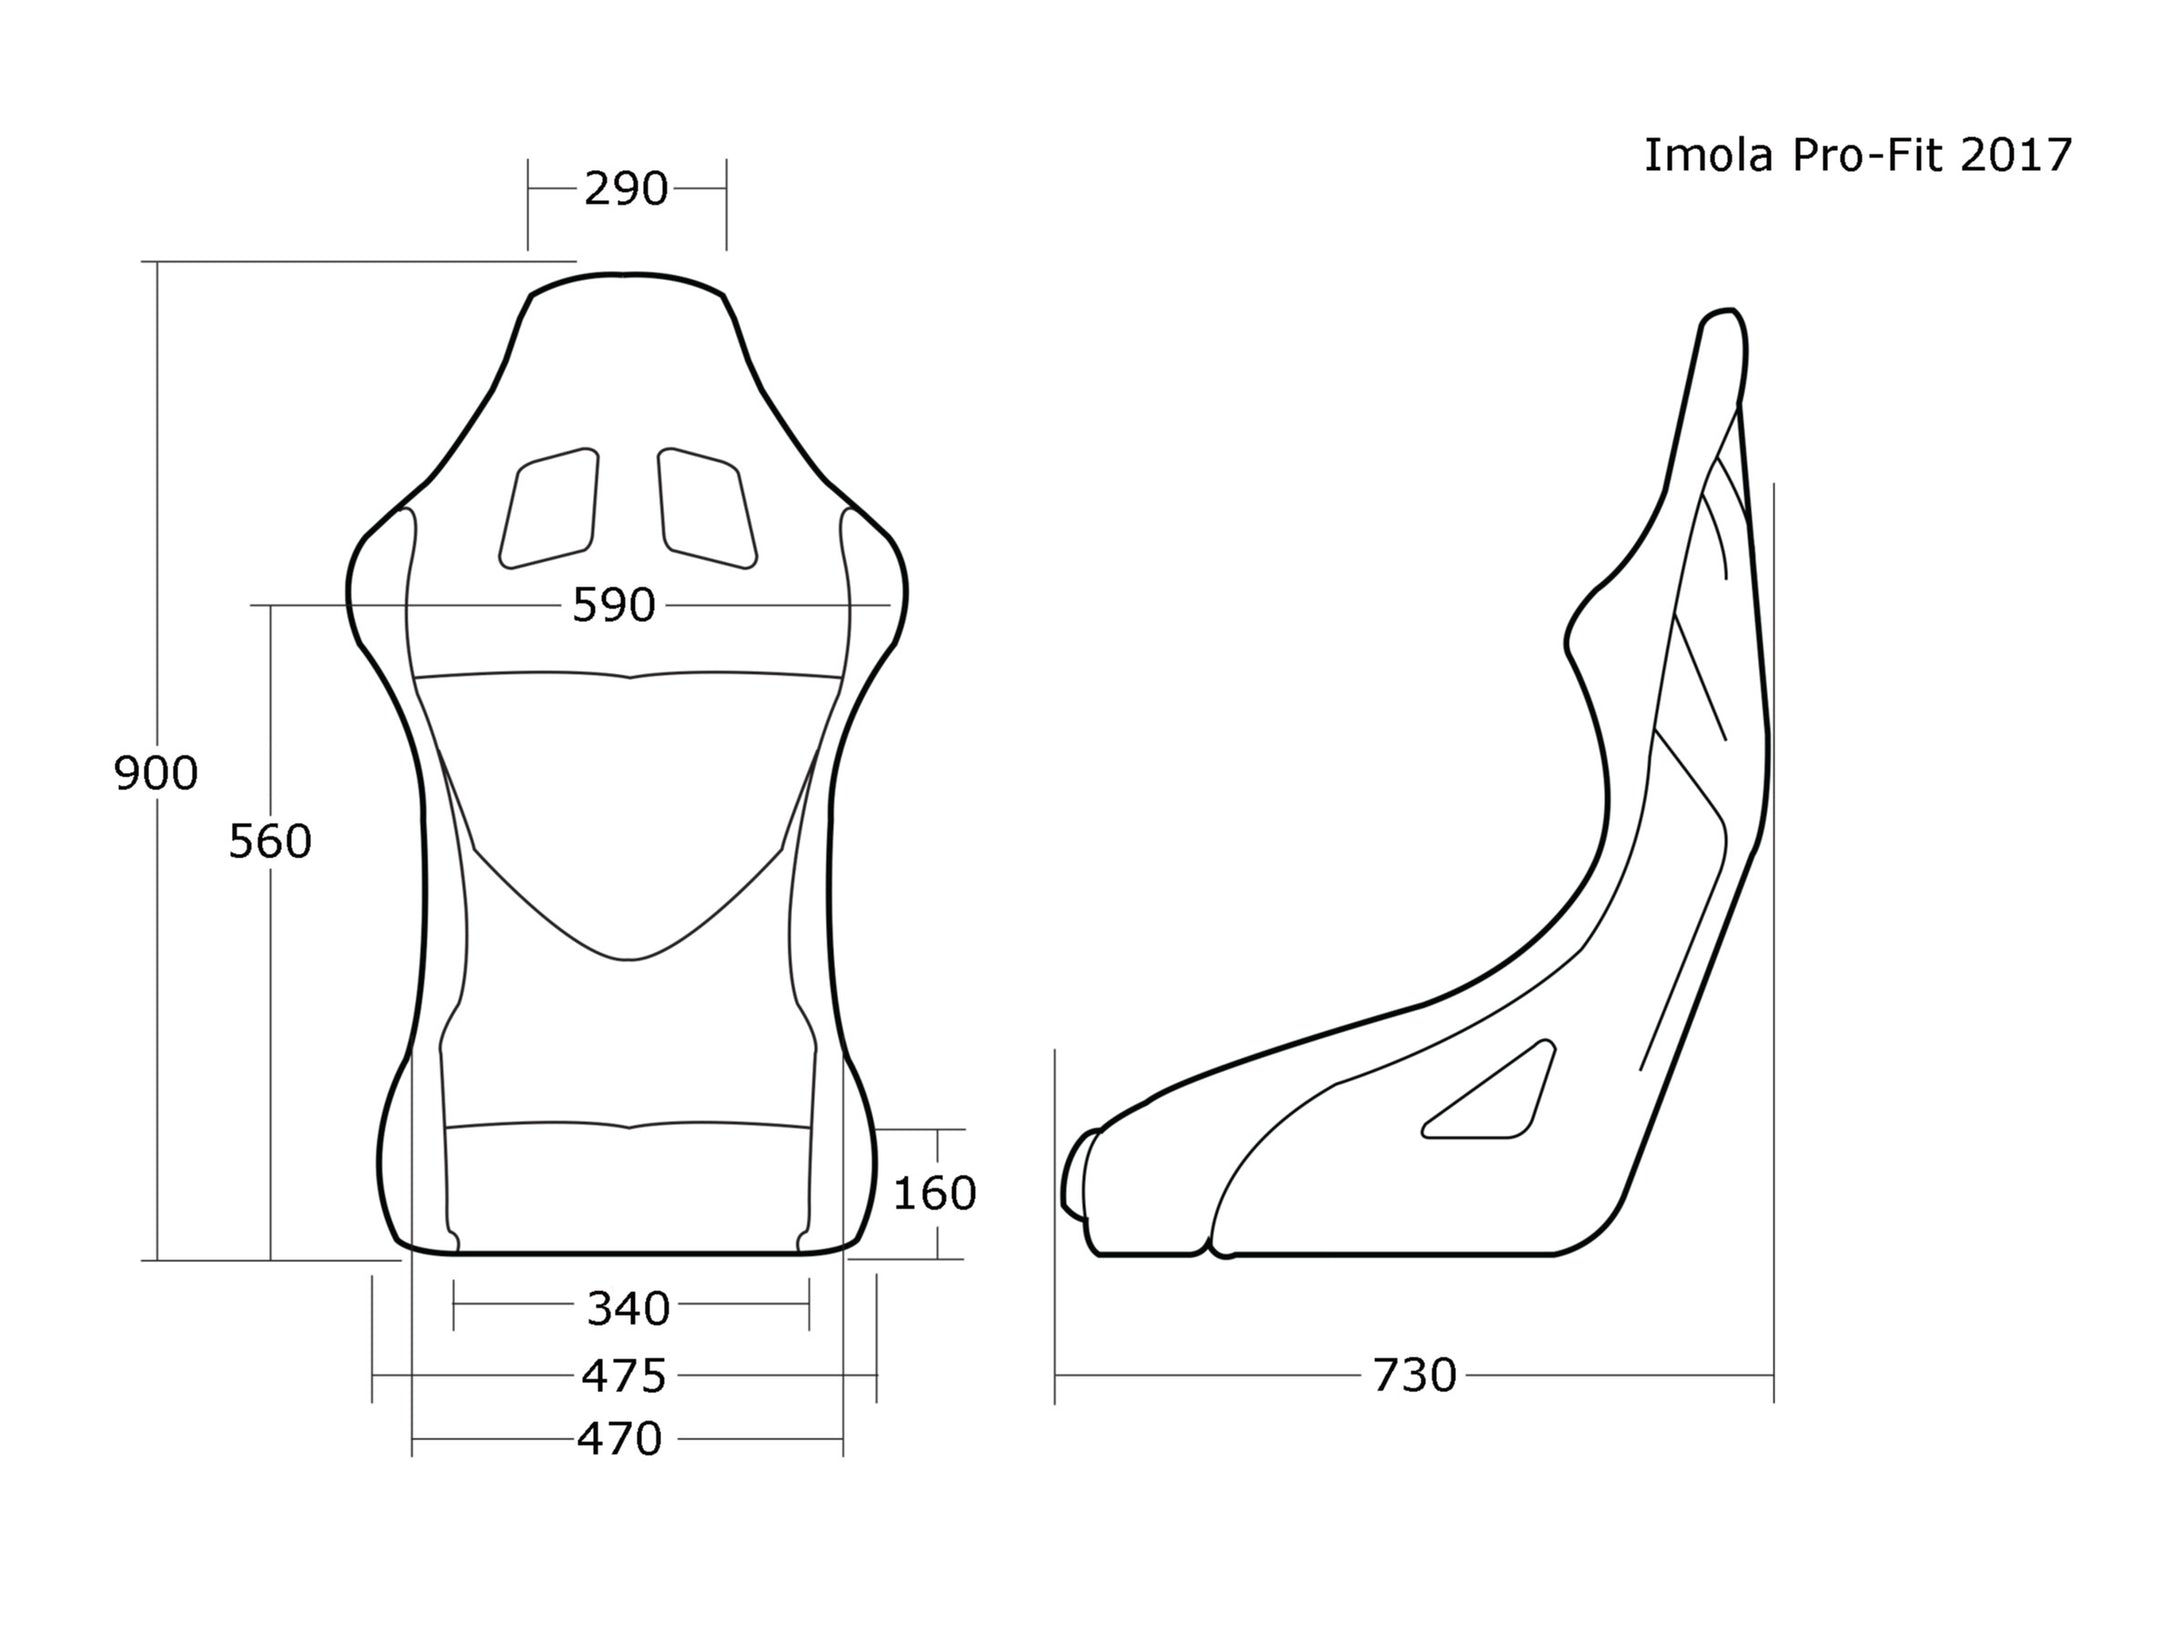 Imola Pro-Fit Seat: Standard or Wide